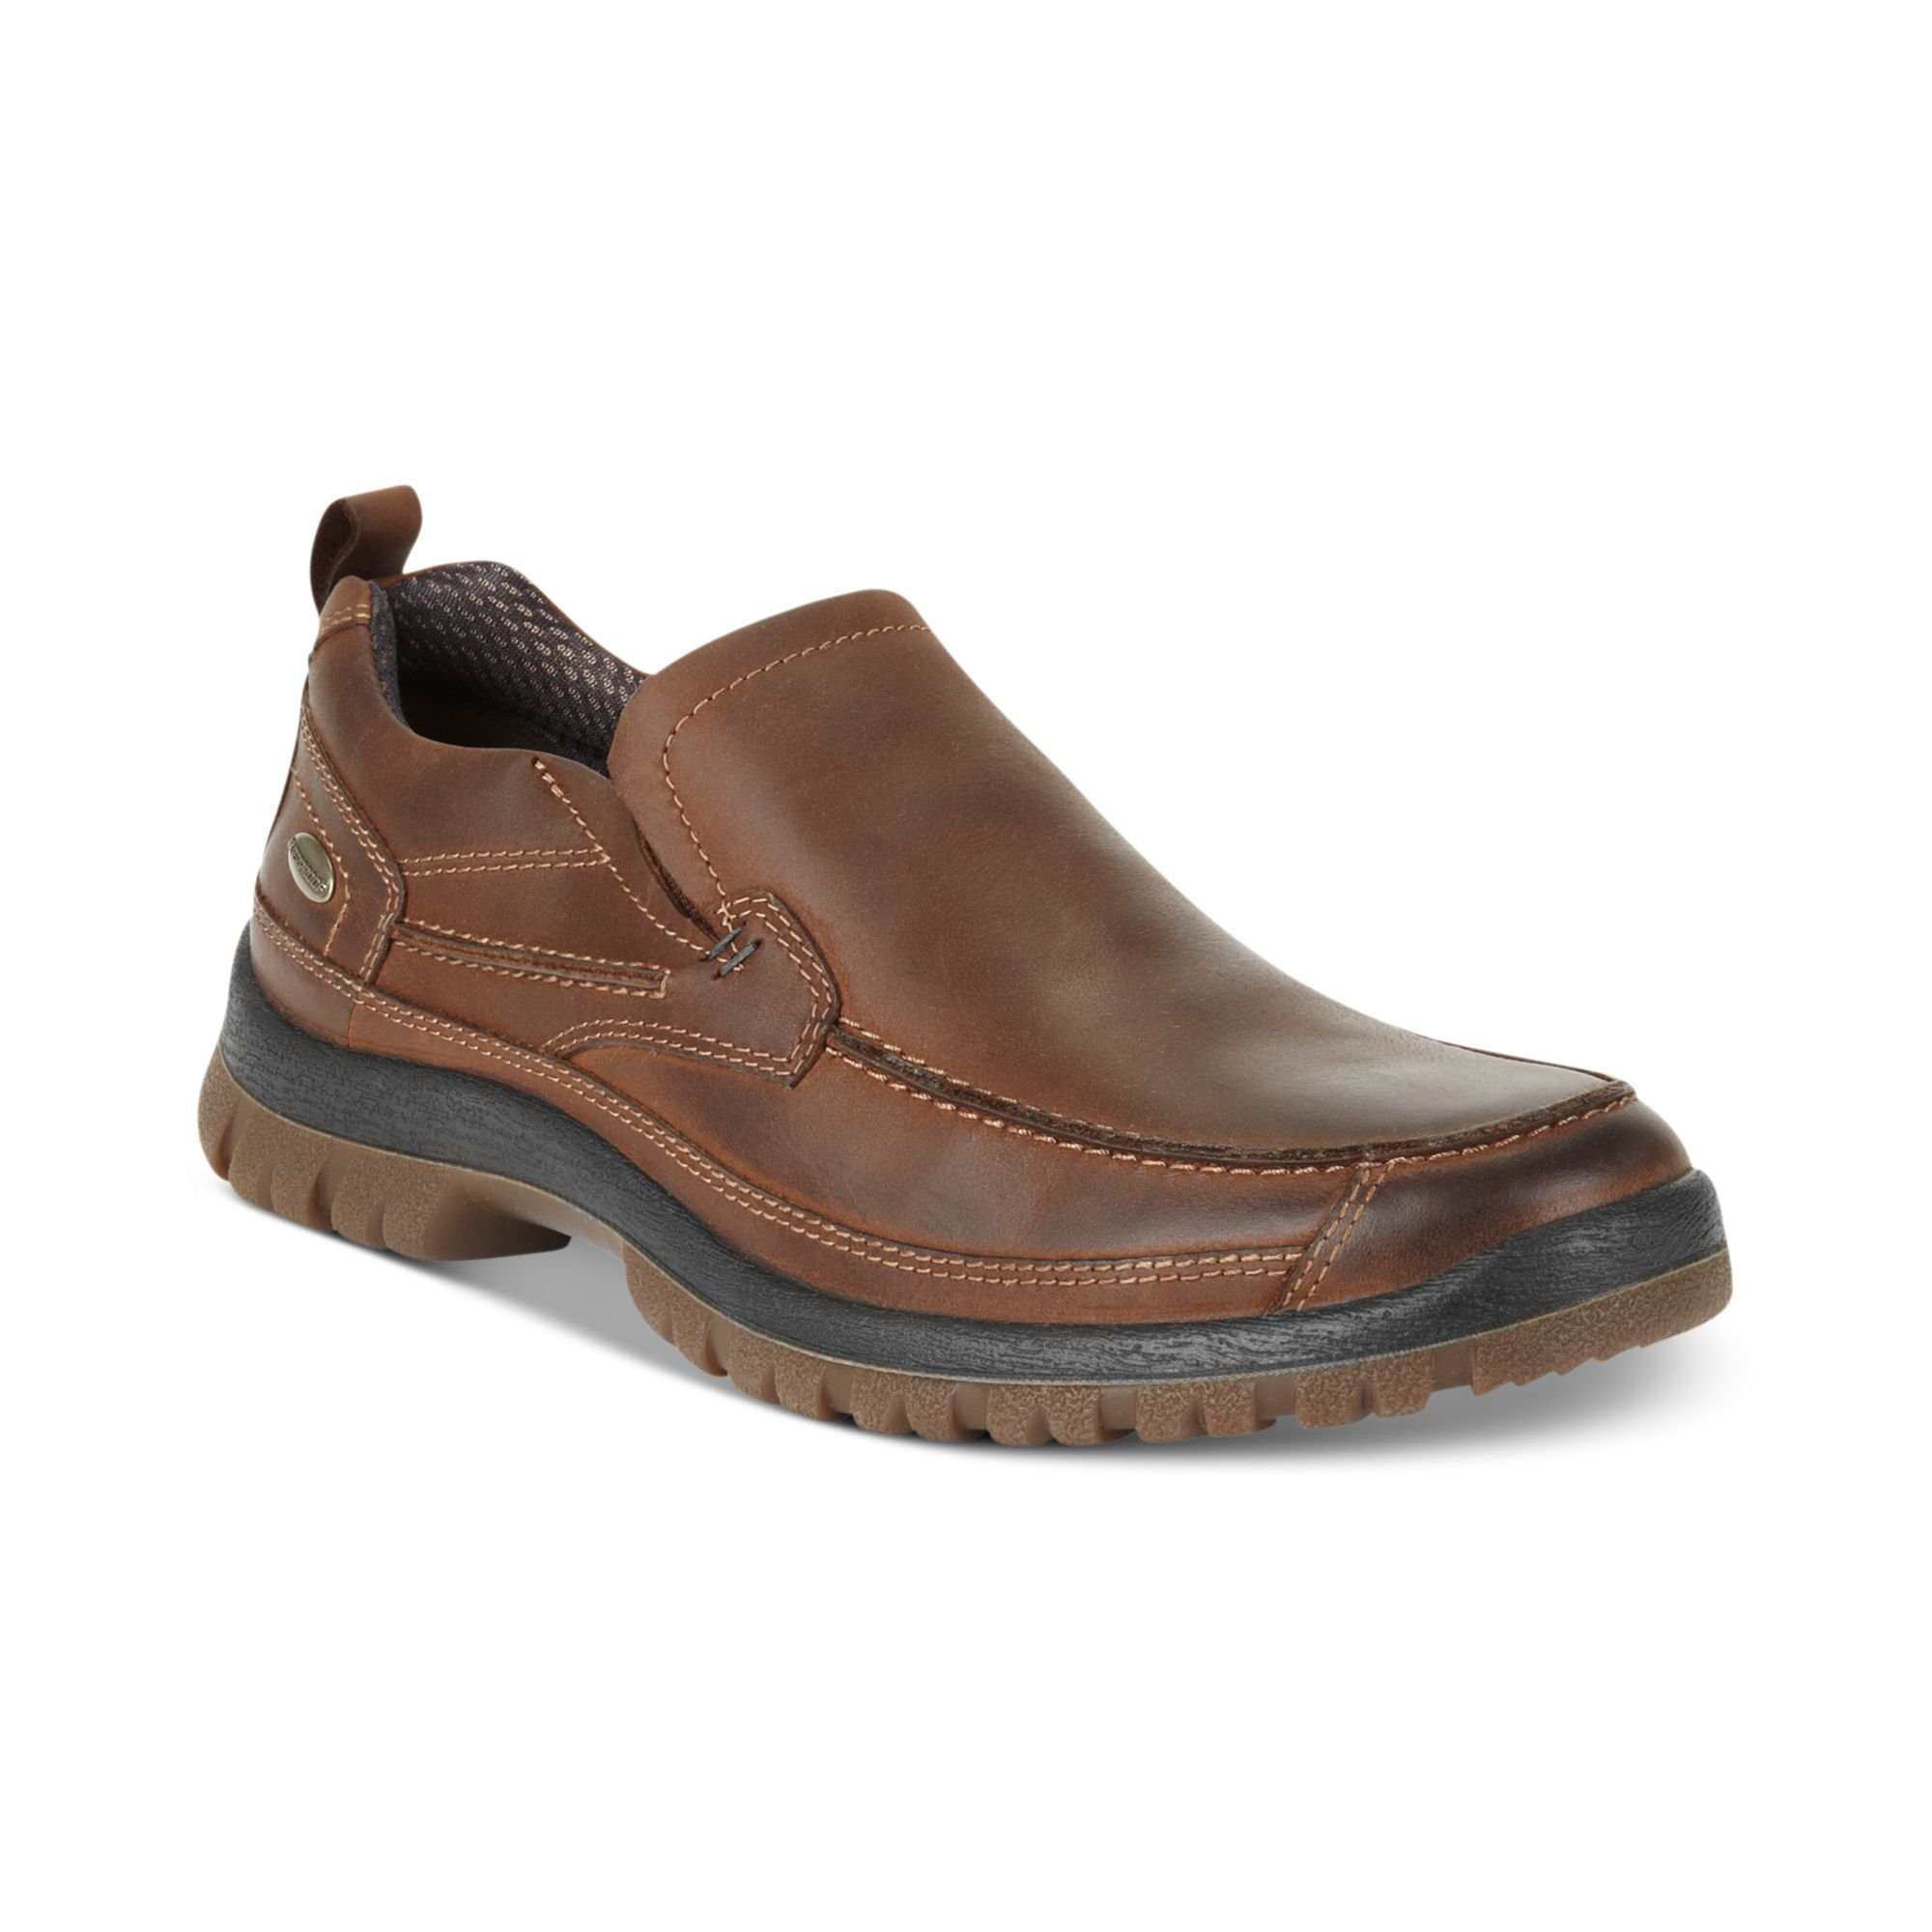 Hush Puppy Shoes For Men On Sale ~ Hush Puppy Sandals